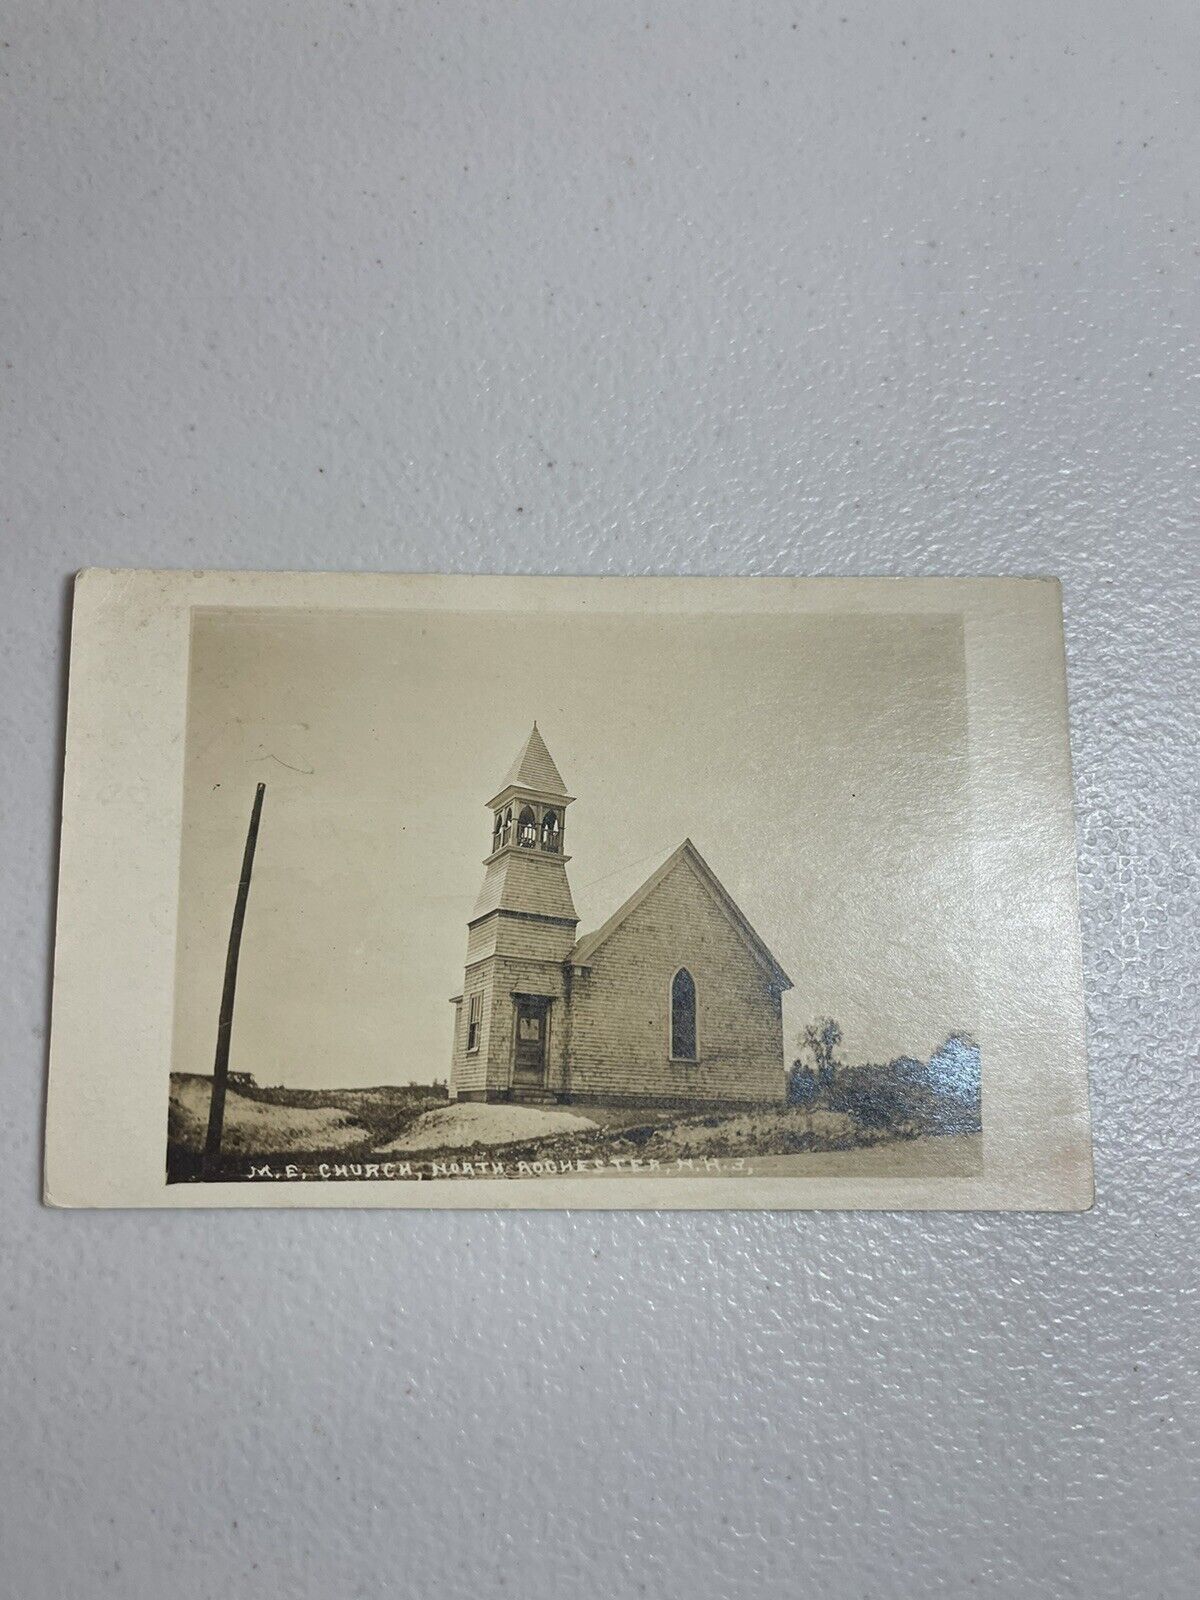 1910 View Of M. E. Church RPPC Photo Posted Antique Postcard North Rochester